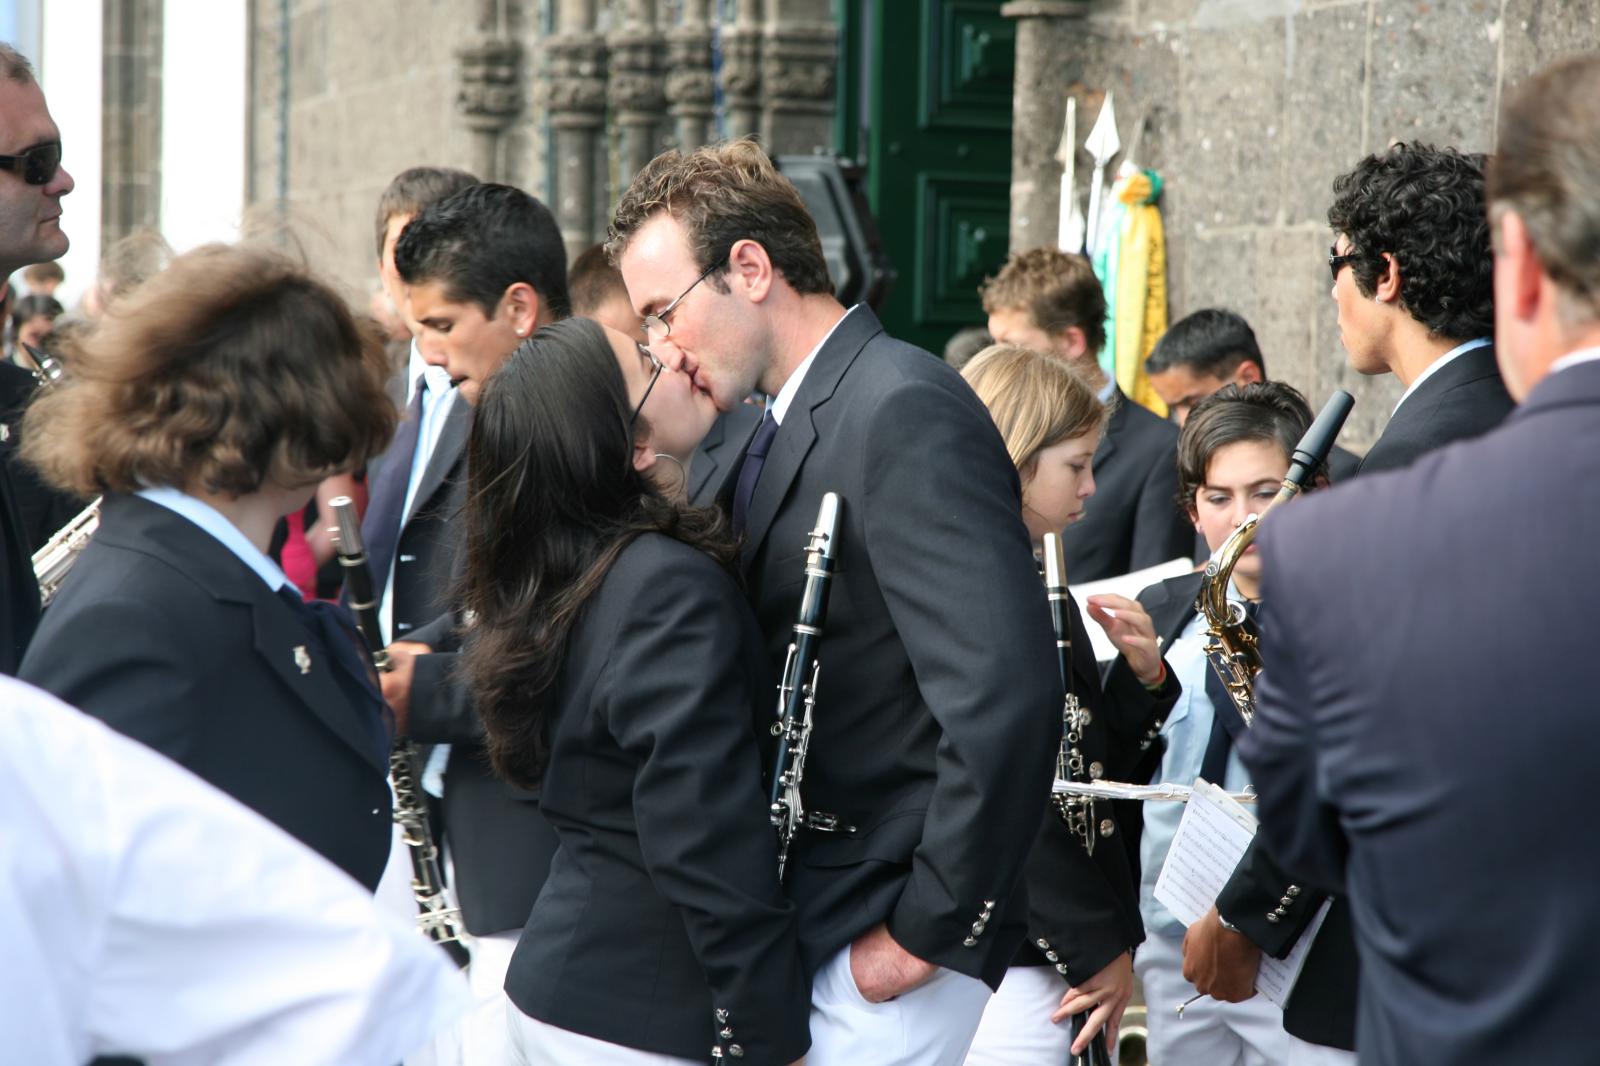 Two musicians from Vila Franca ...chestra kissing during a break.